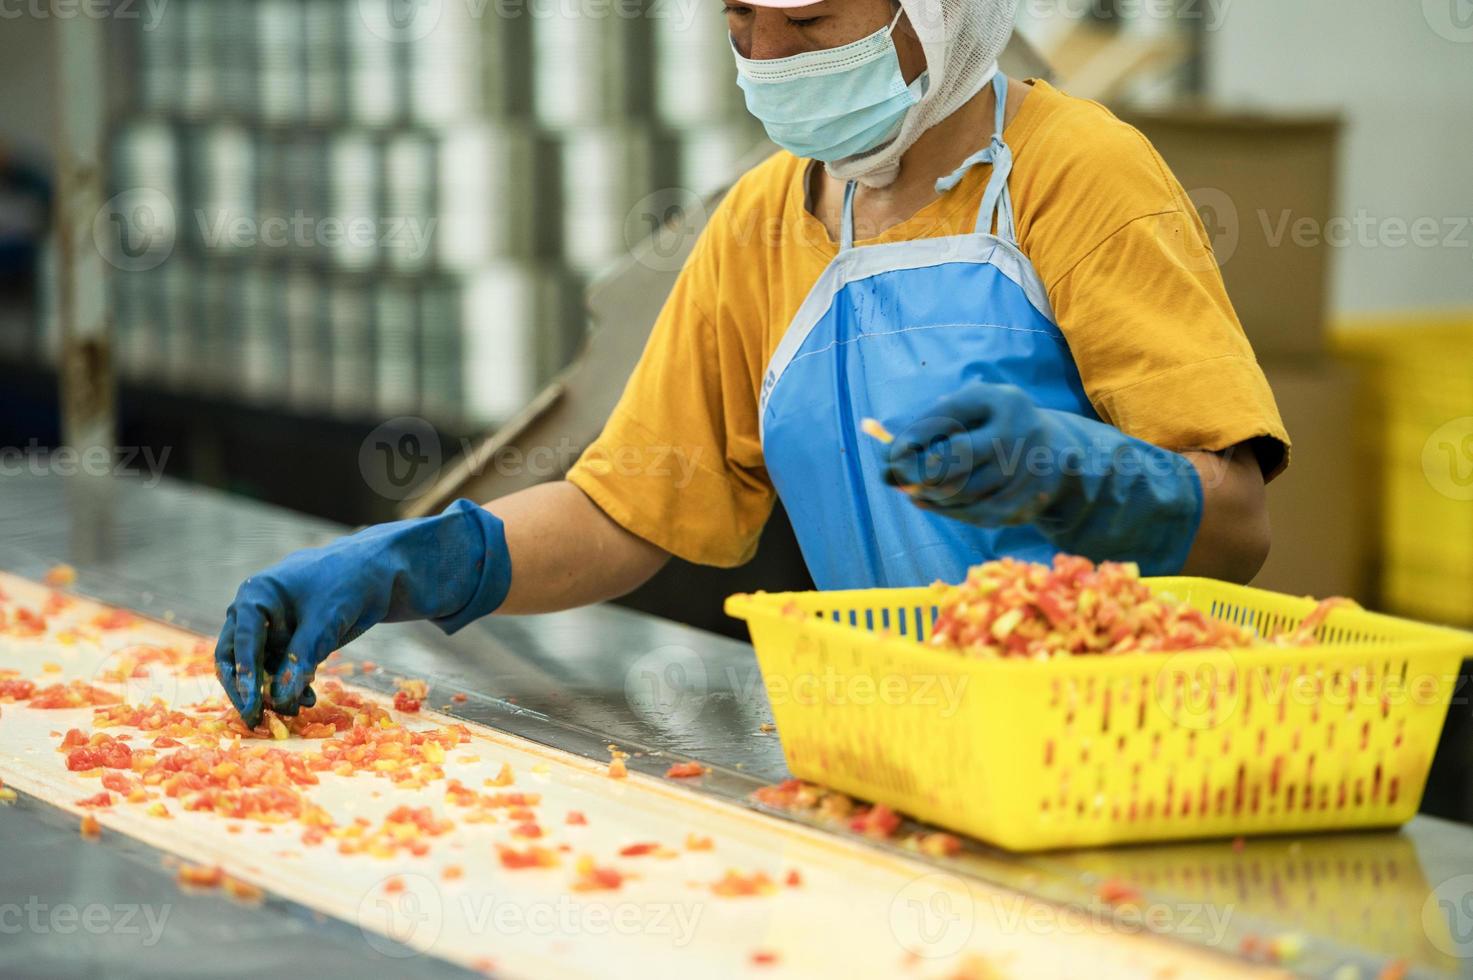 Workers chopping tomatoes for canned tomato sauce in industrial production patterns, Industrial production of tomatoes and tomato paste, food industry, food factory photo